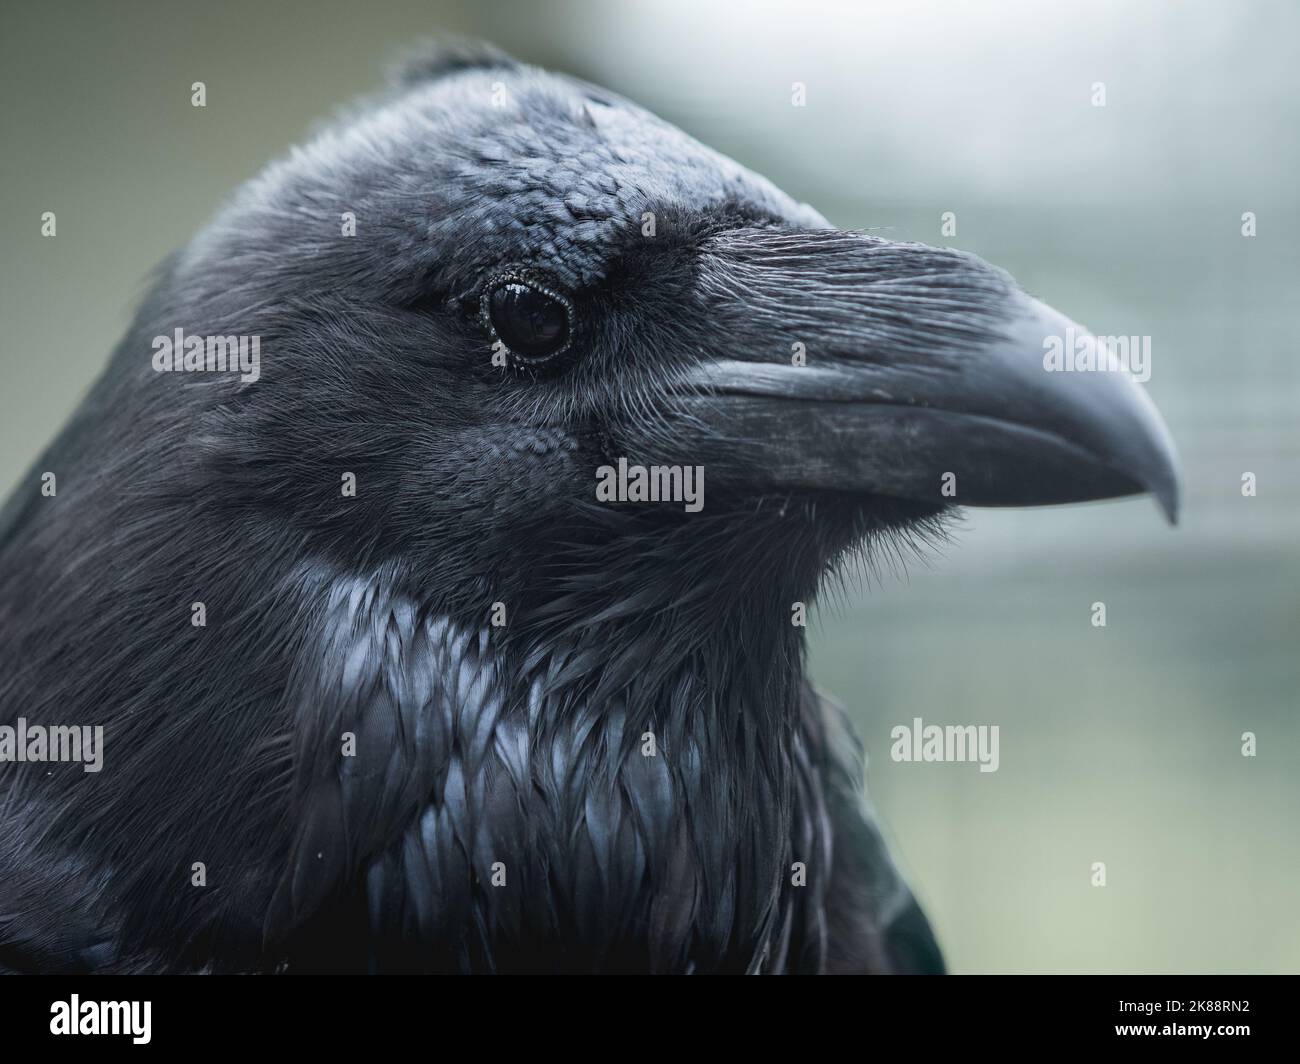 Close up portrait of common raven or corvus corax on green grass blurred background. Stock Photo